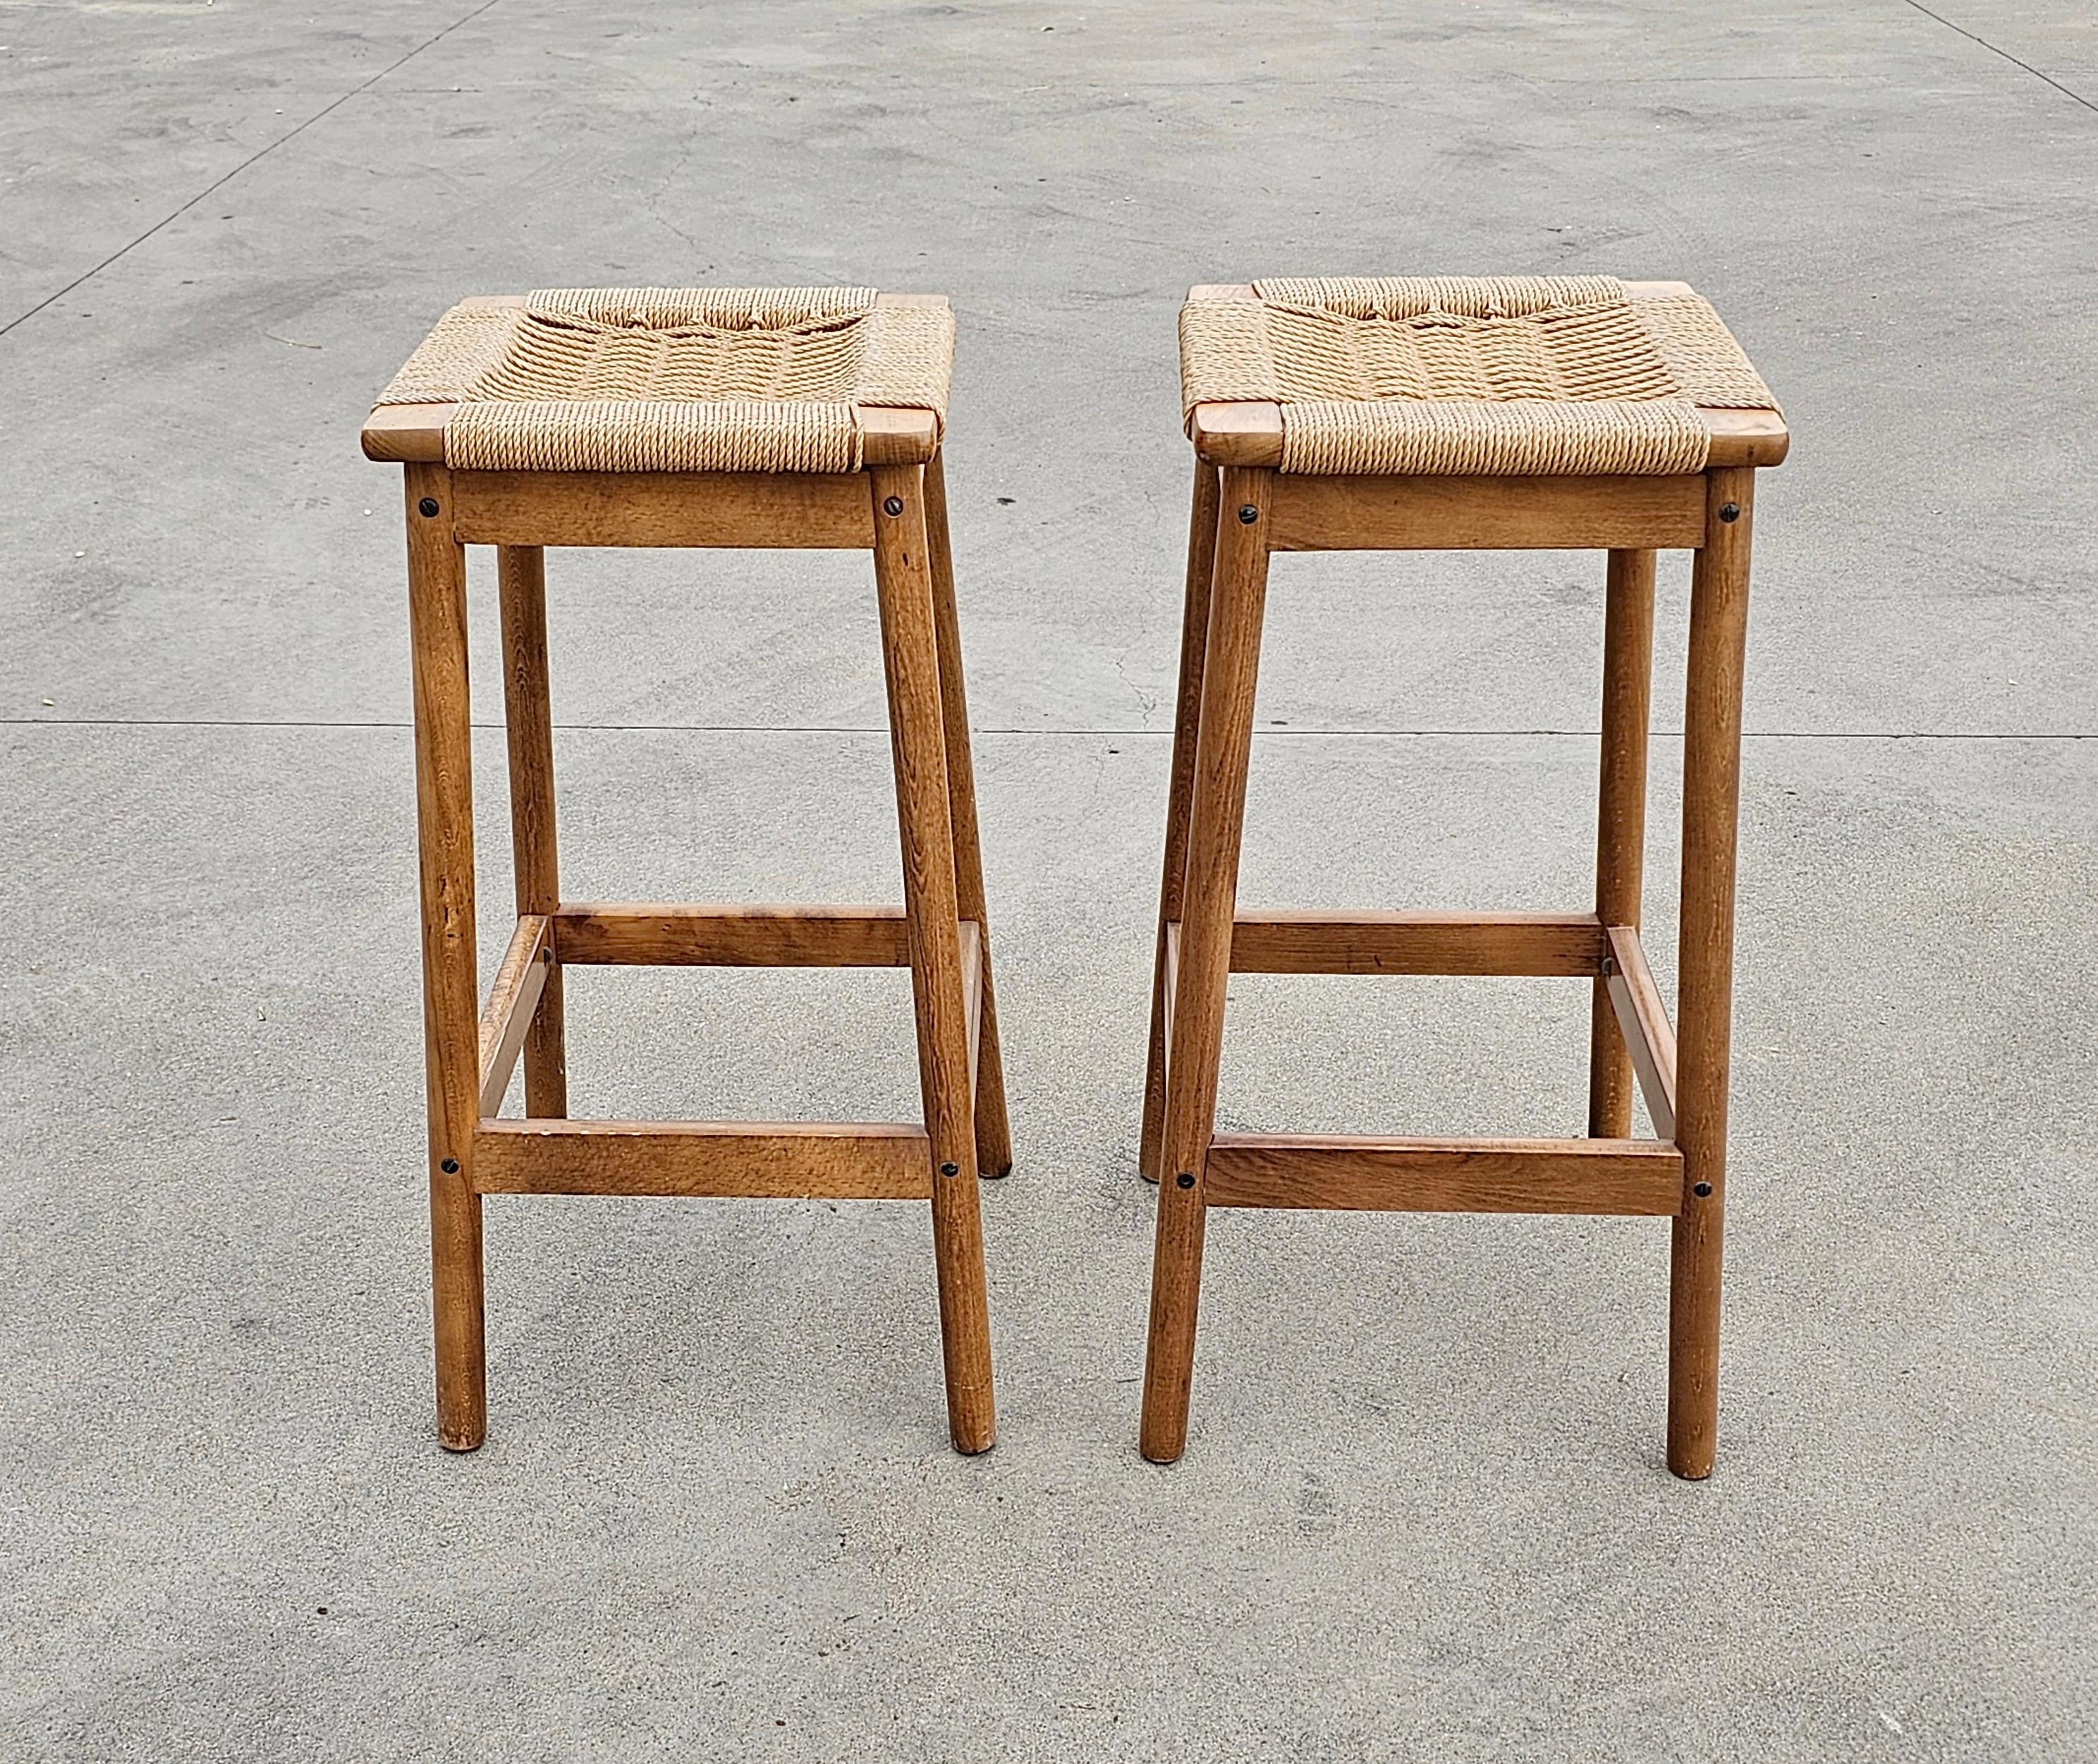 In this listing you will find a pair of very rare and gorgeous Mid Century Modern Bar Stools done in oak, with Danish paper cord seats. The stools are designed in the manner of Hans J. Wegner. Elegant, simple and timeless! Made in Yugoslavia in